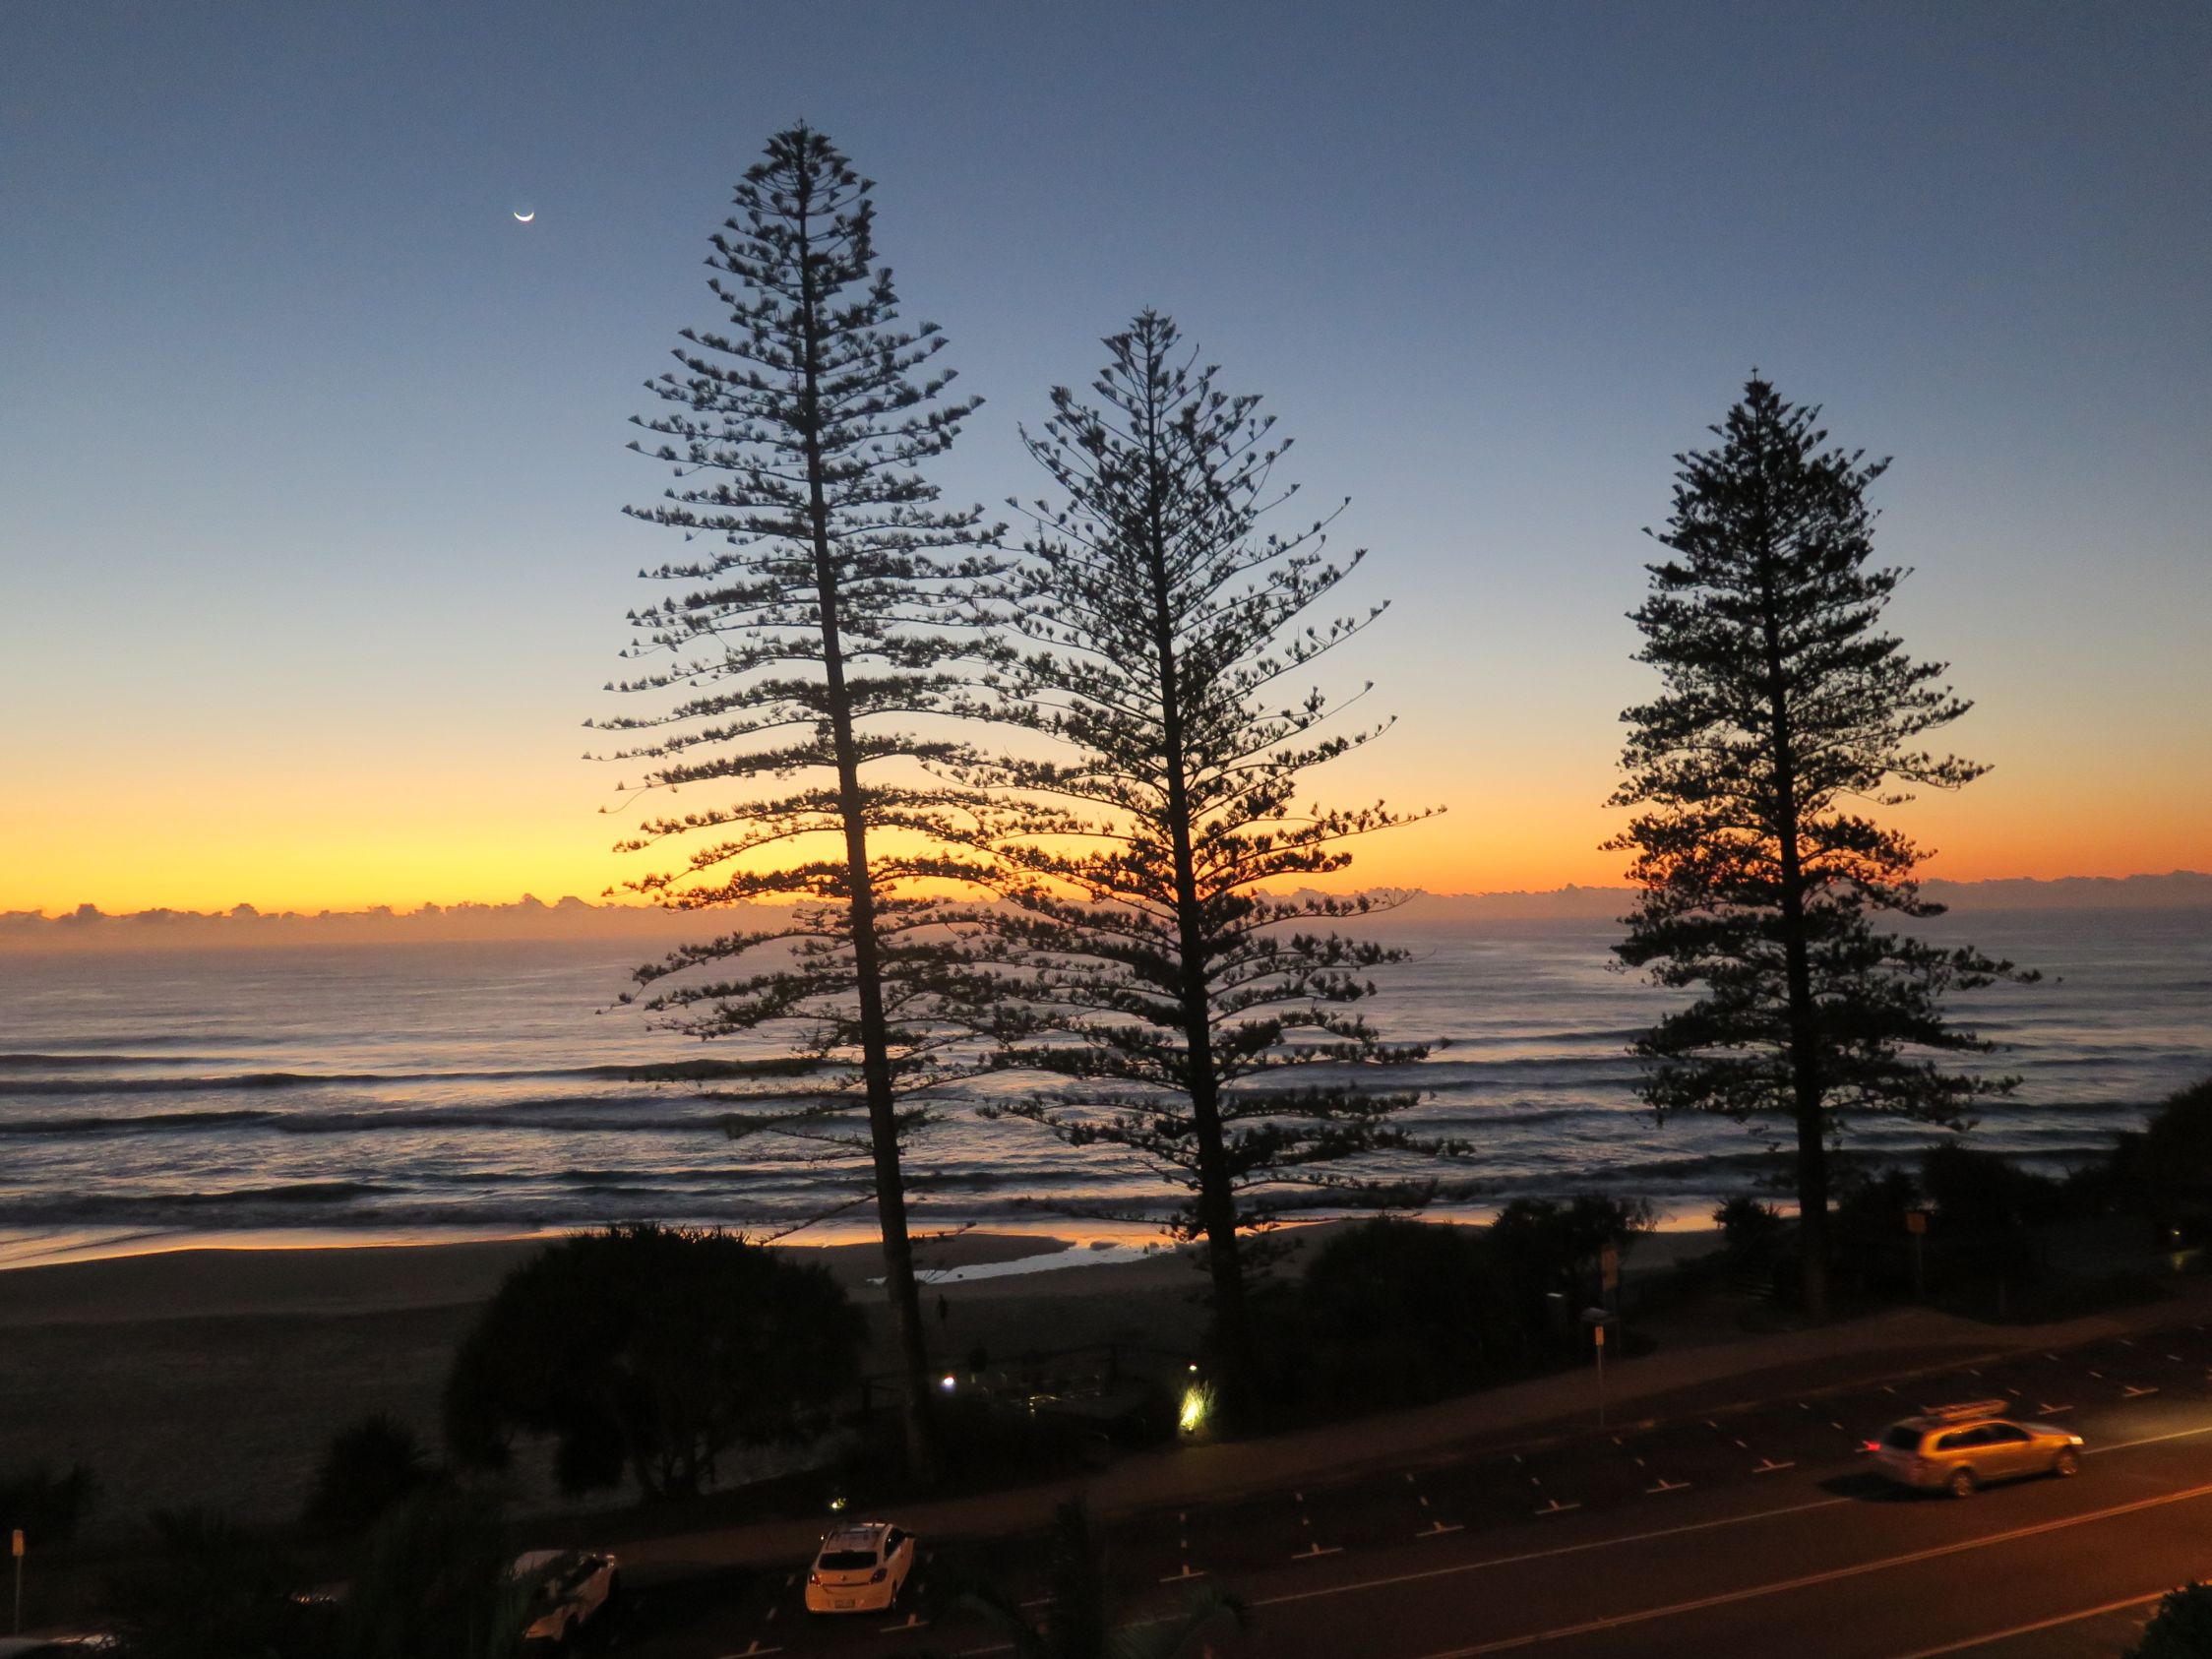 Mooloolaba eat, stay and play